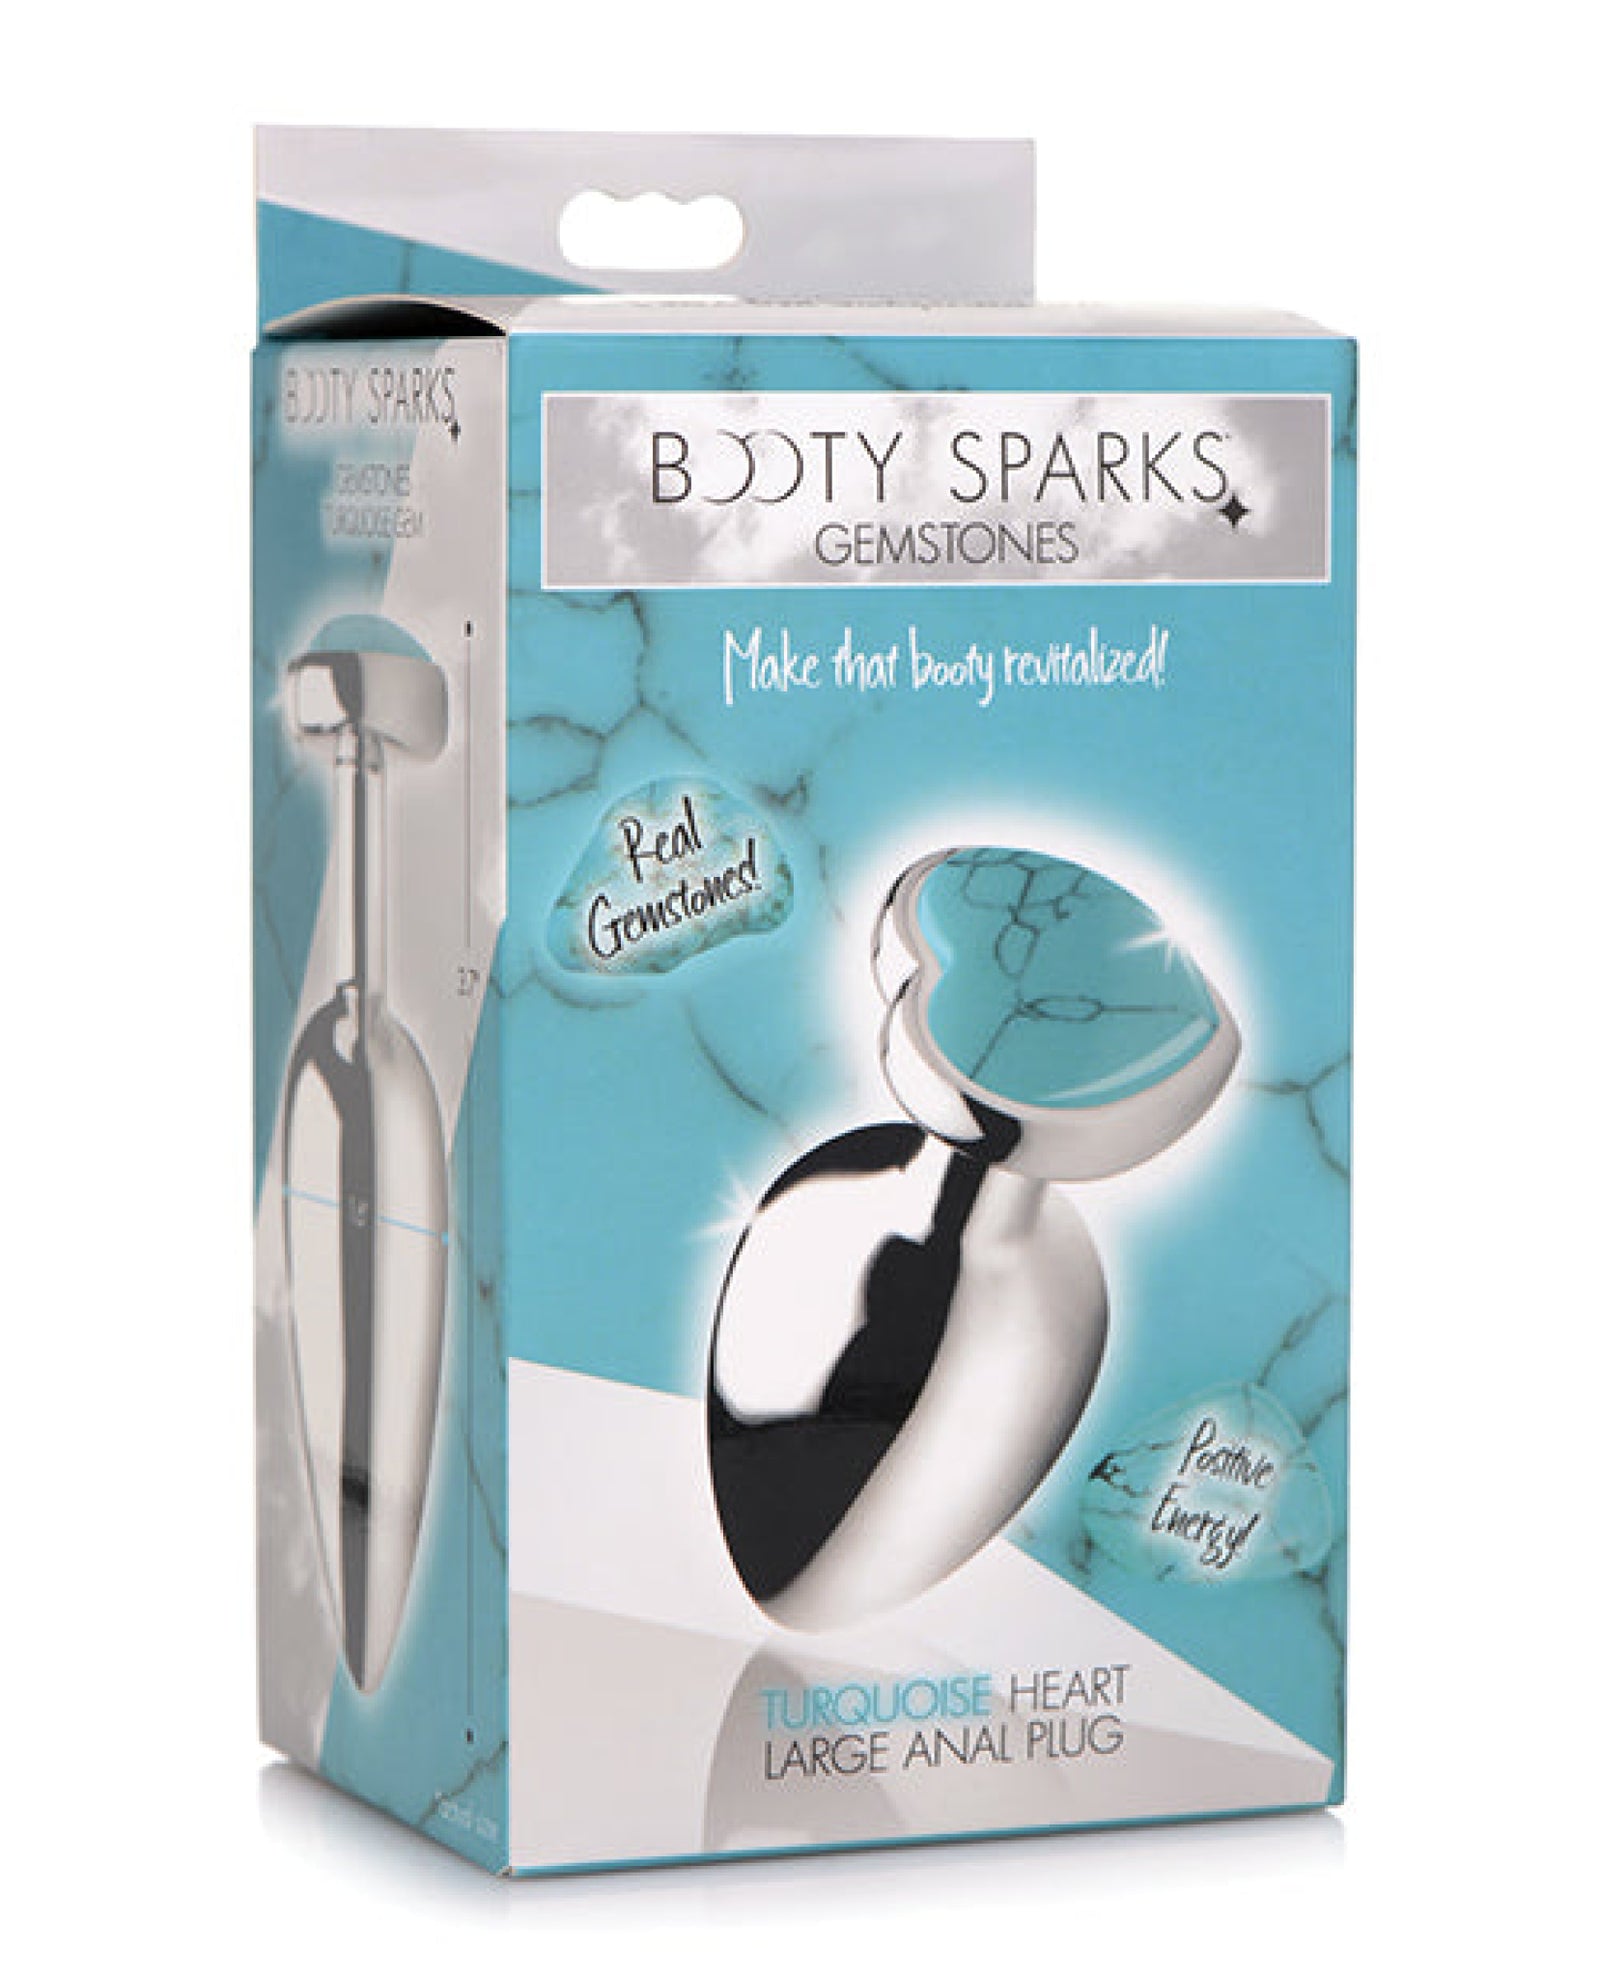 Booty Sparks Gemstones Turquoise Heart Anal Plug Booty Sparks